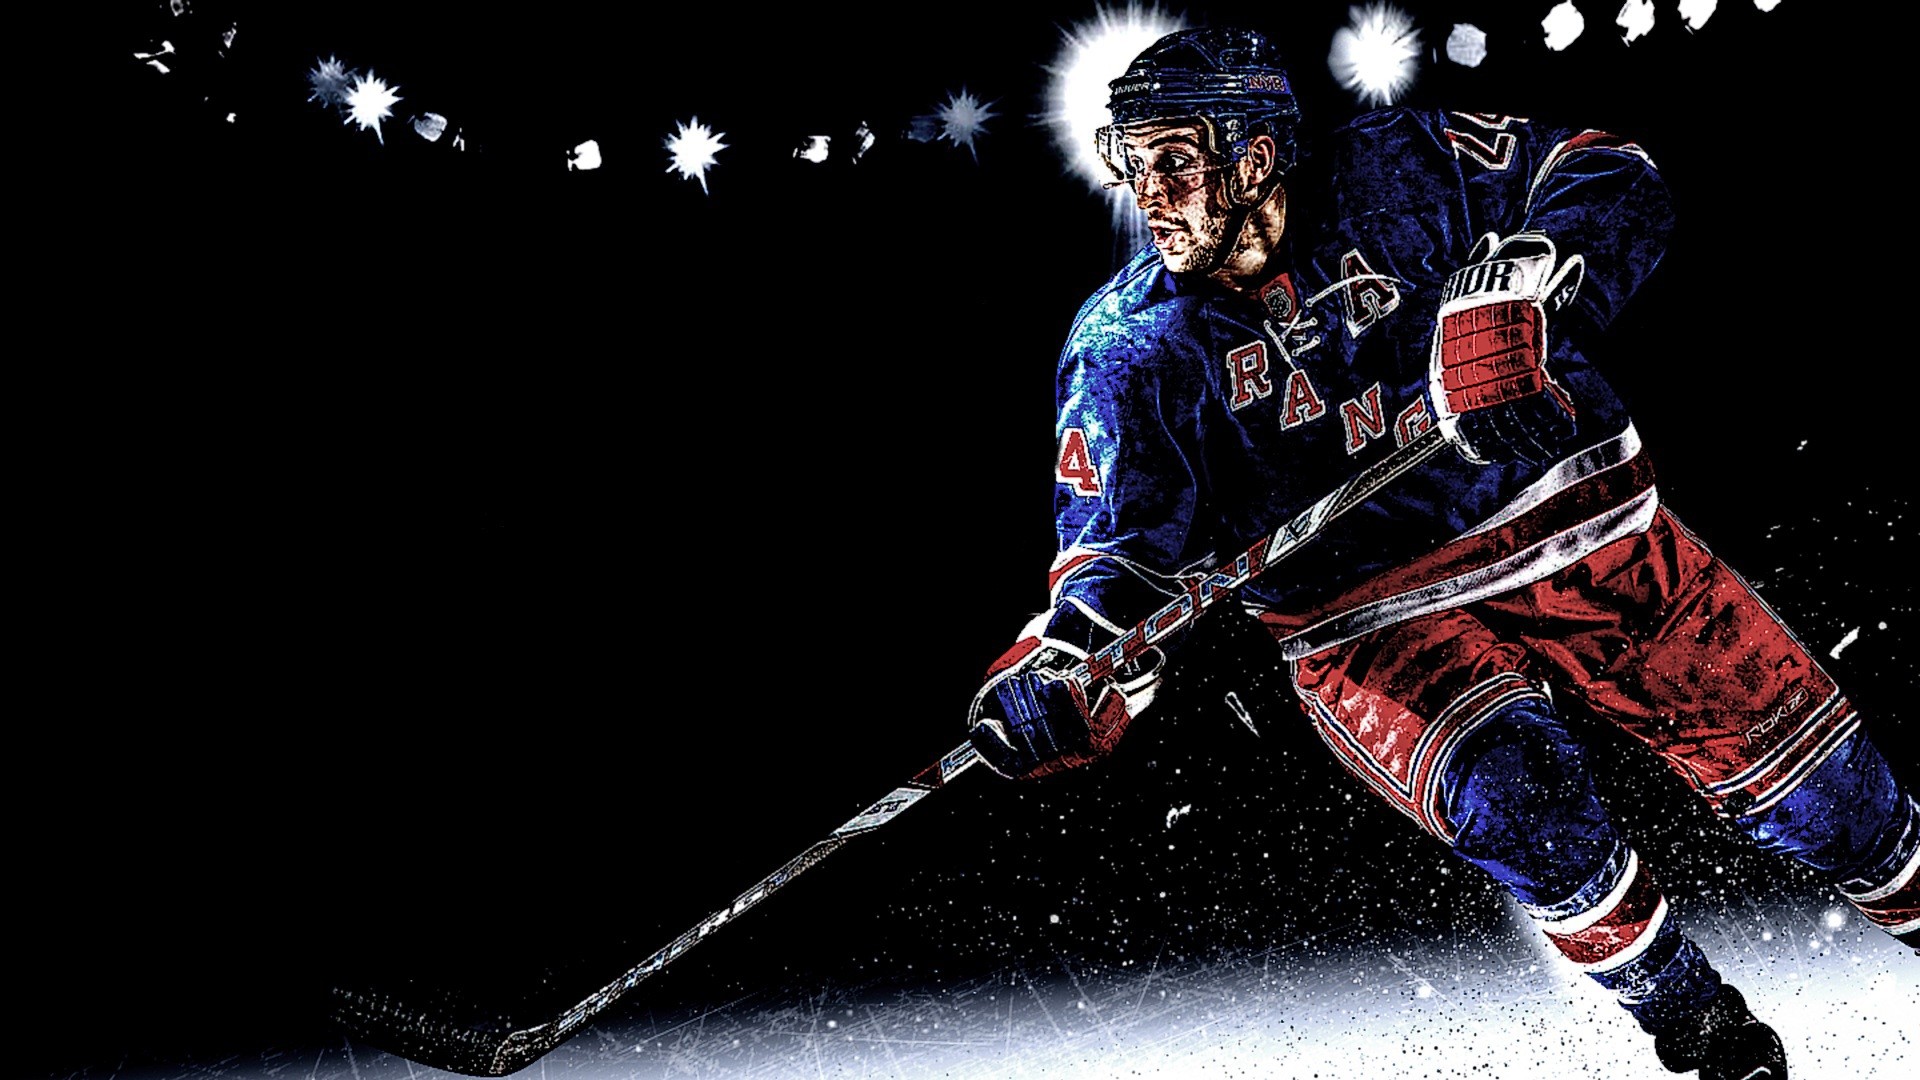 USA Hockey iPhone Wallpaper (64+ images)
 Under Armour Hockey Wallpaper